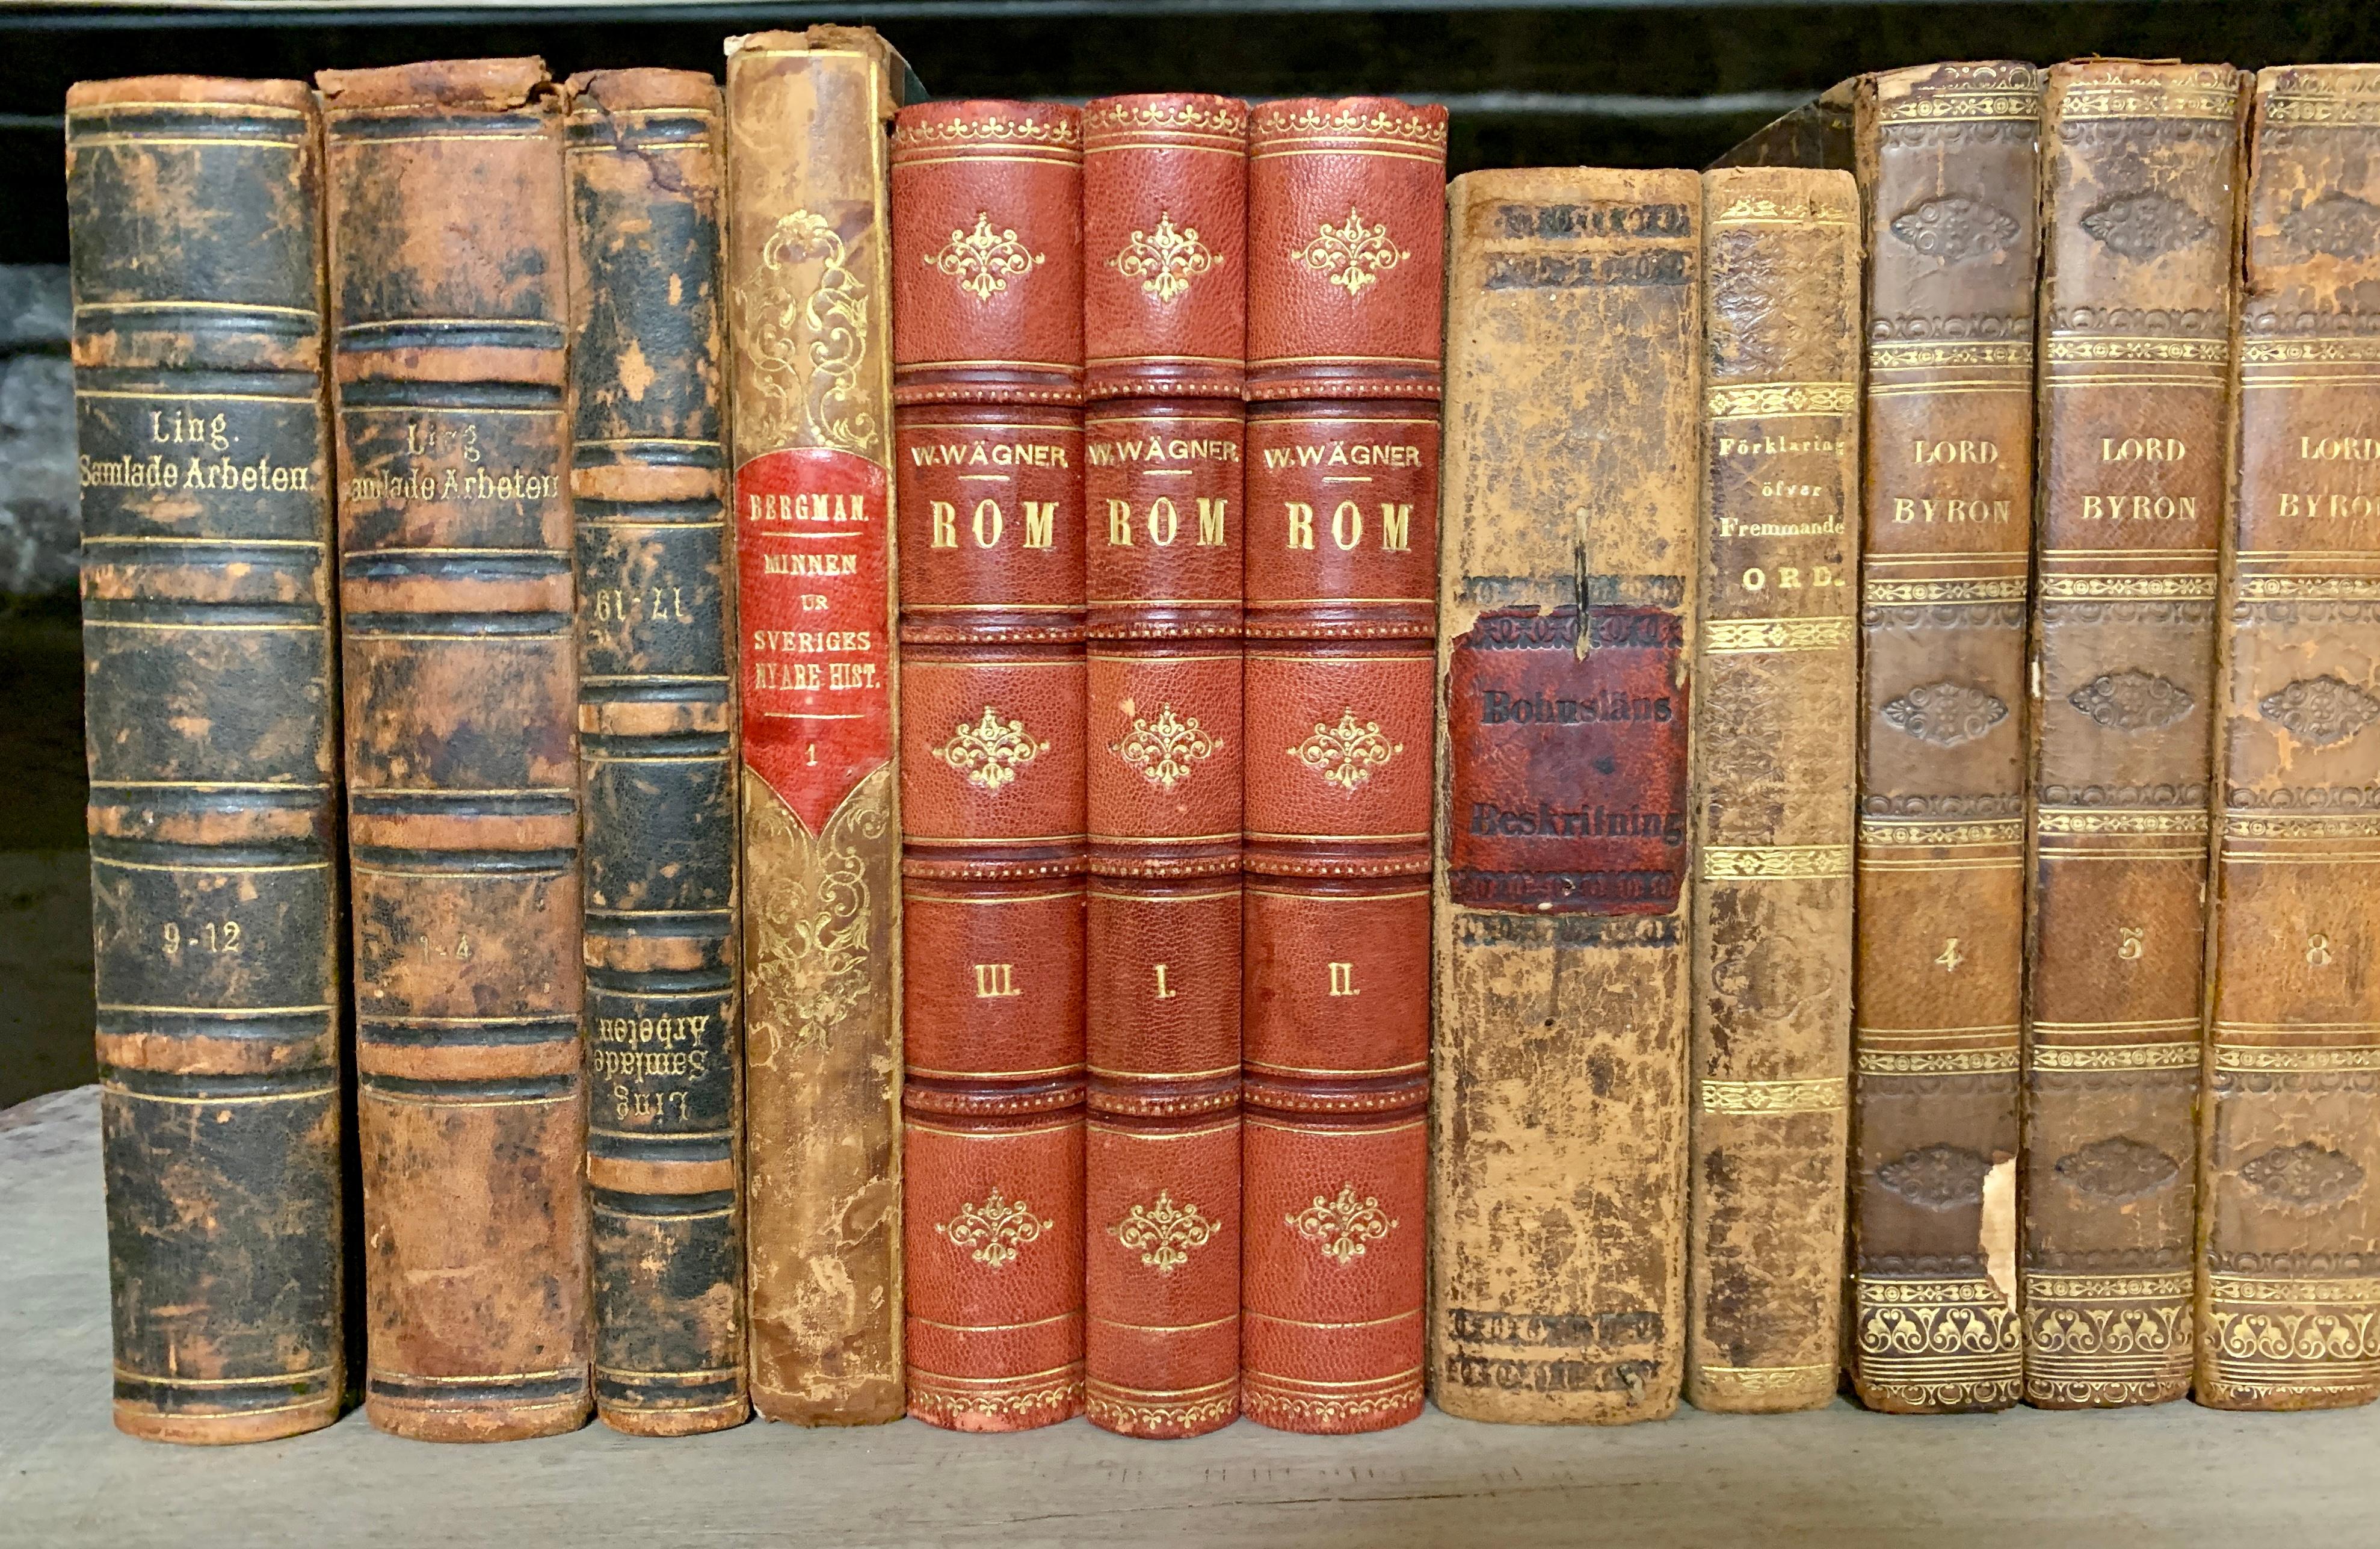 A collection of 24 French and Swedish decorative antique leather-bound library books dated from 1822-1872. One book is dated 1929. In some of these books are included the original maps and lithography.
The books are wrapped in leather-bound covers,